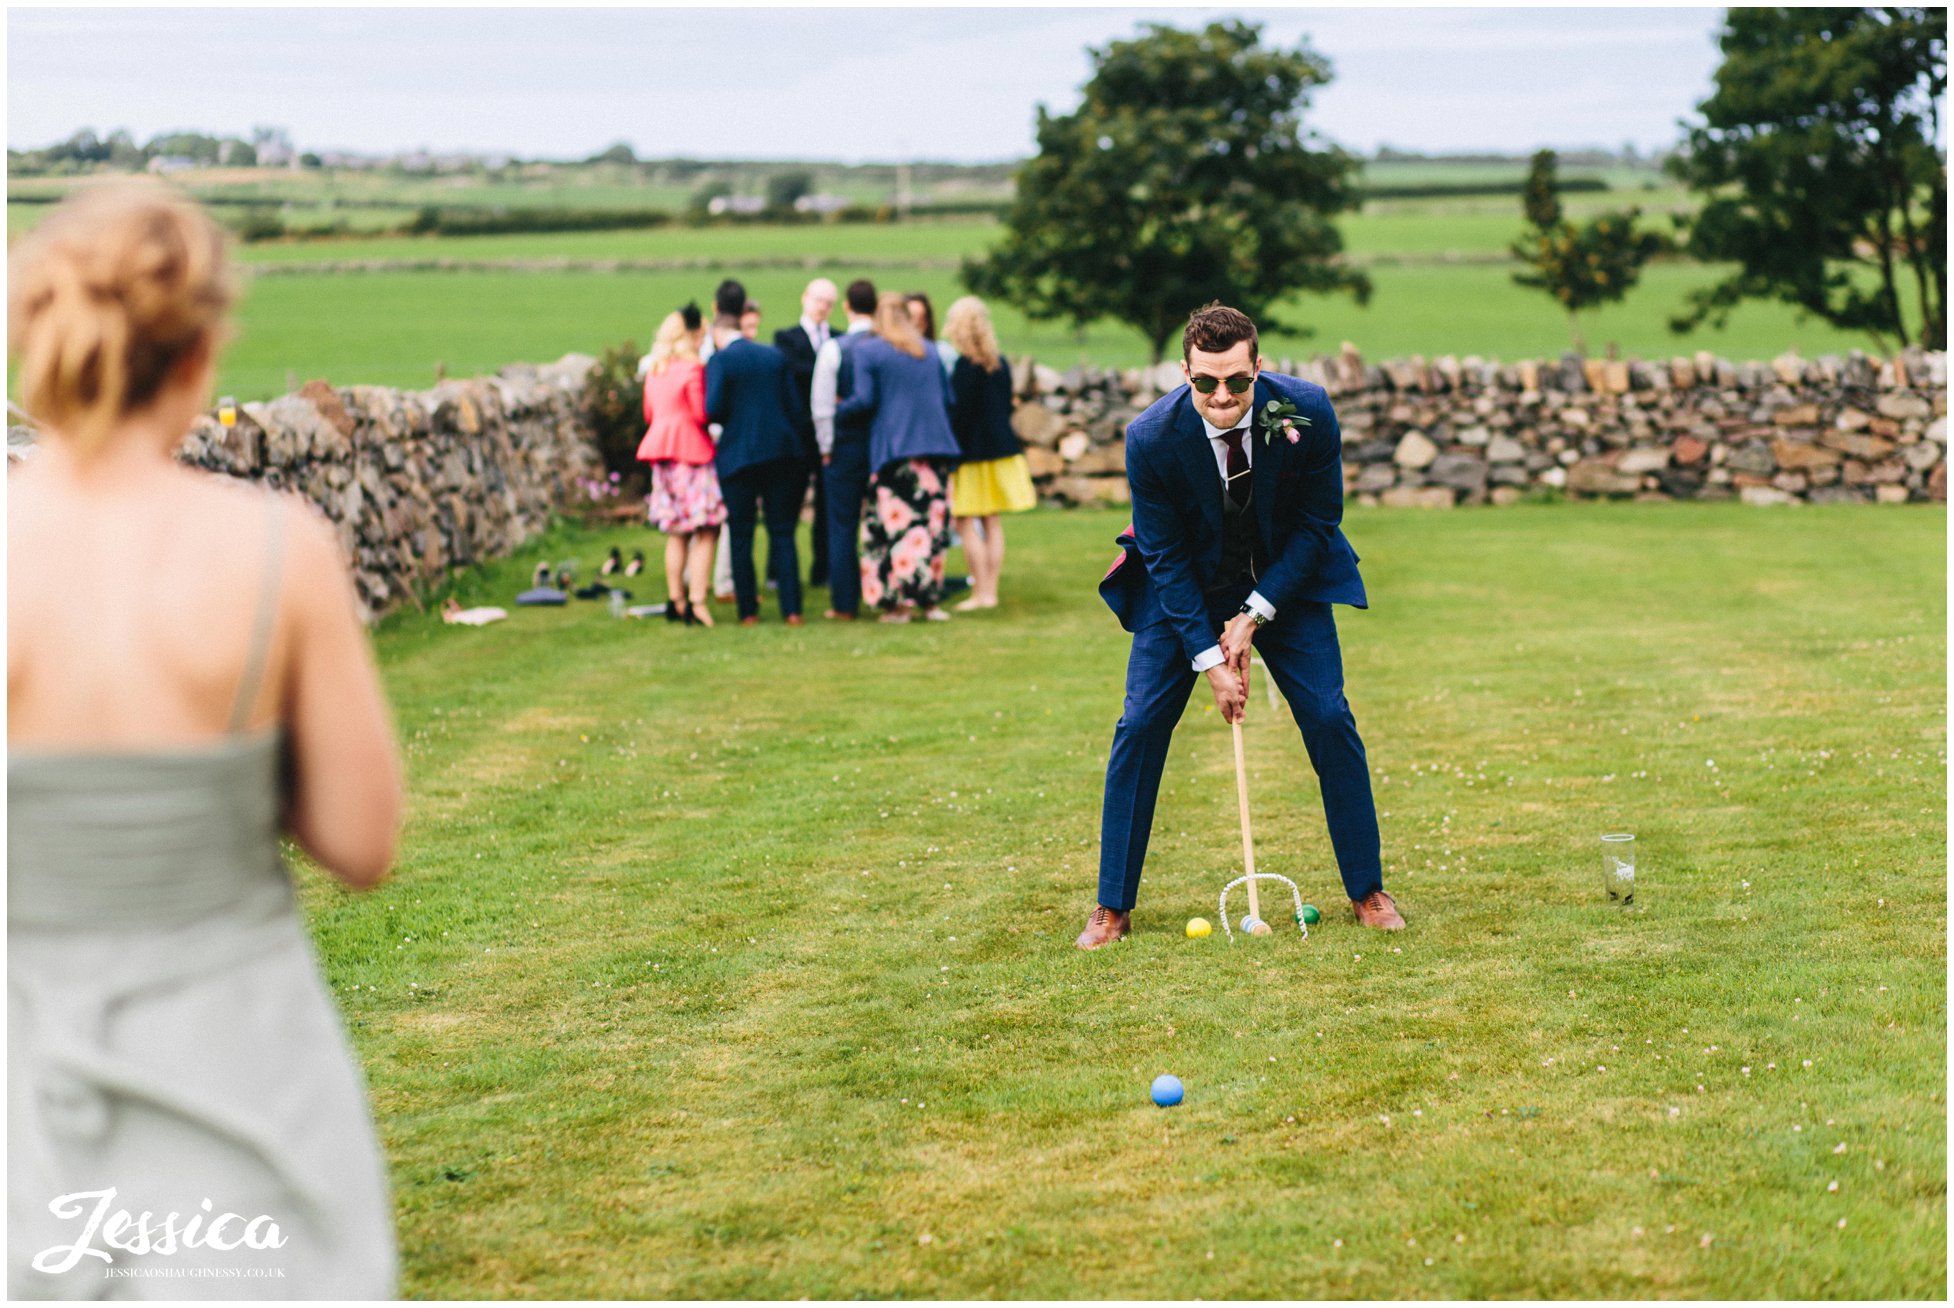 groom plays croquet at his north wales tipi wedding